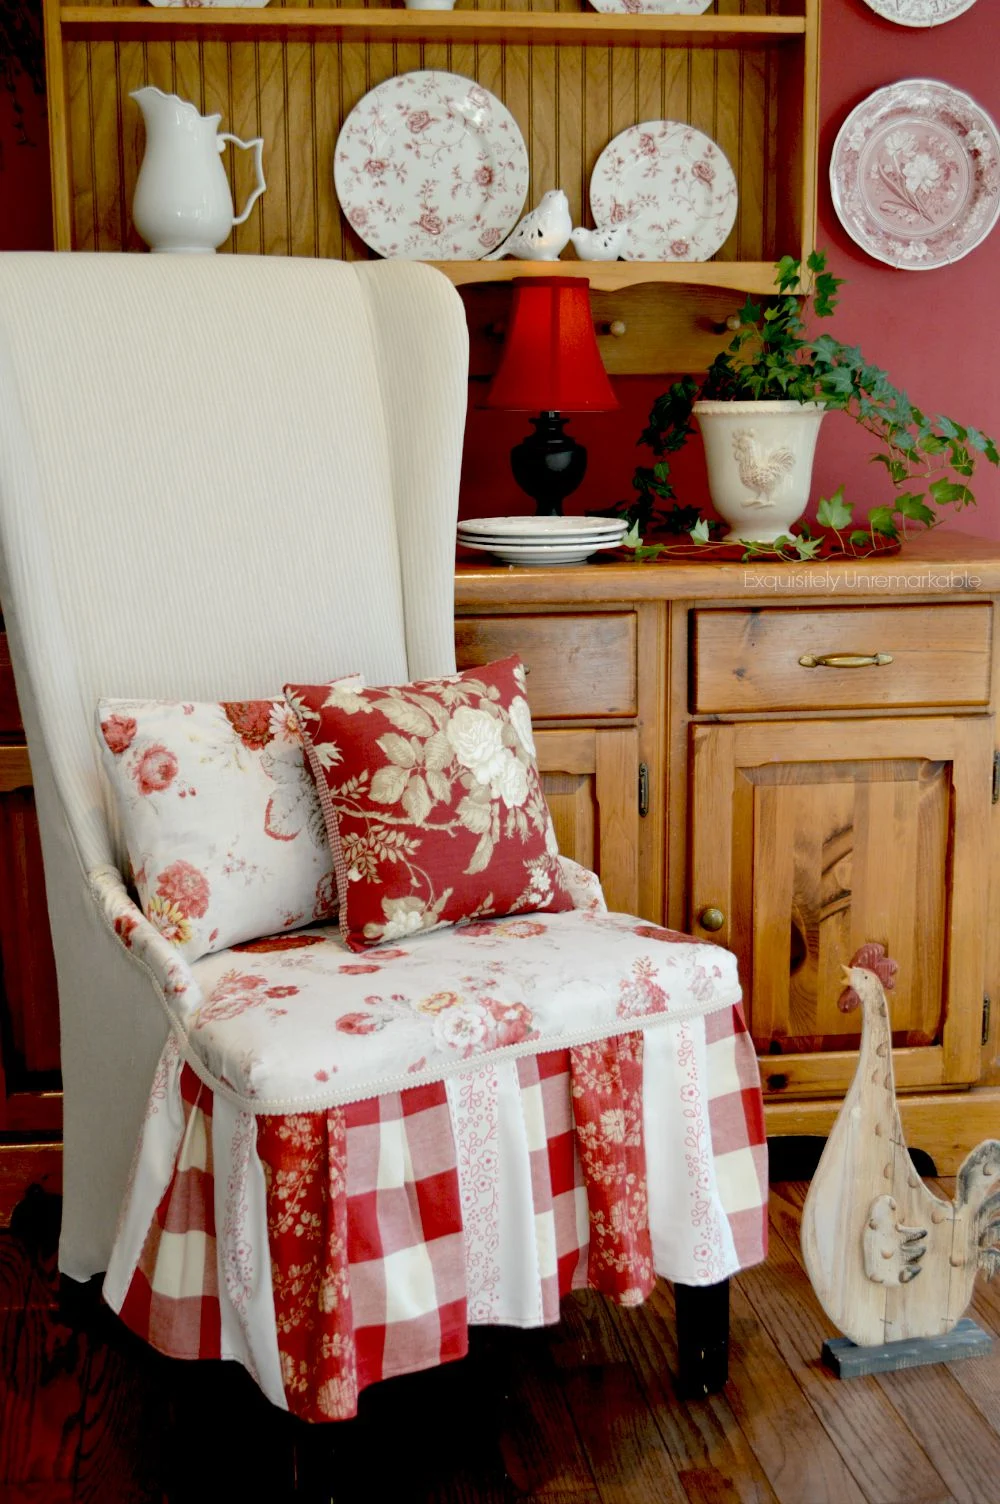 How To Make An Upholstered Chair Skirt